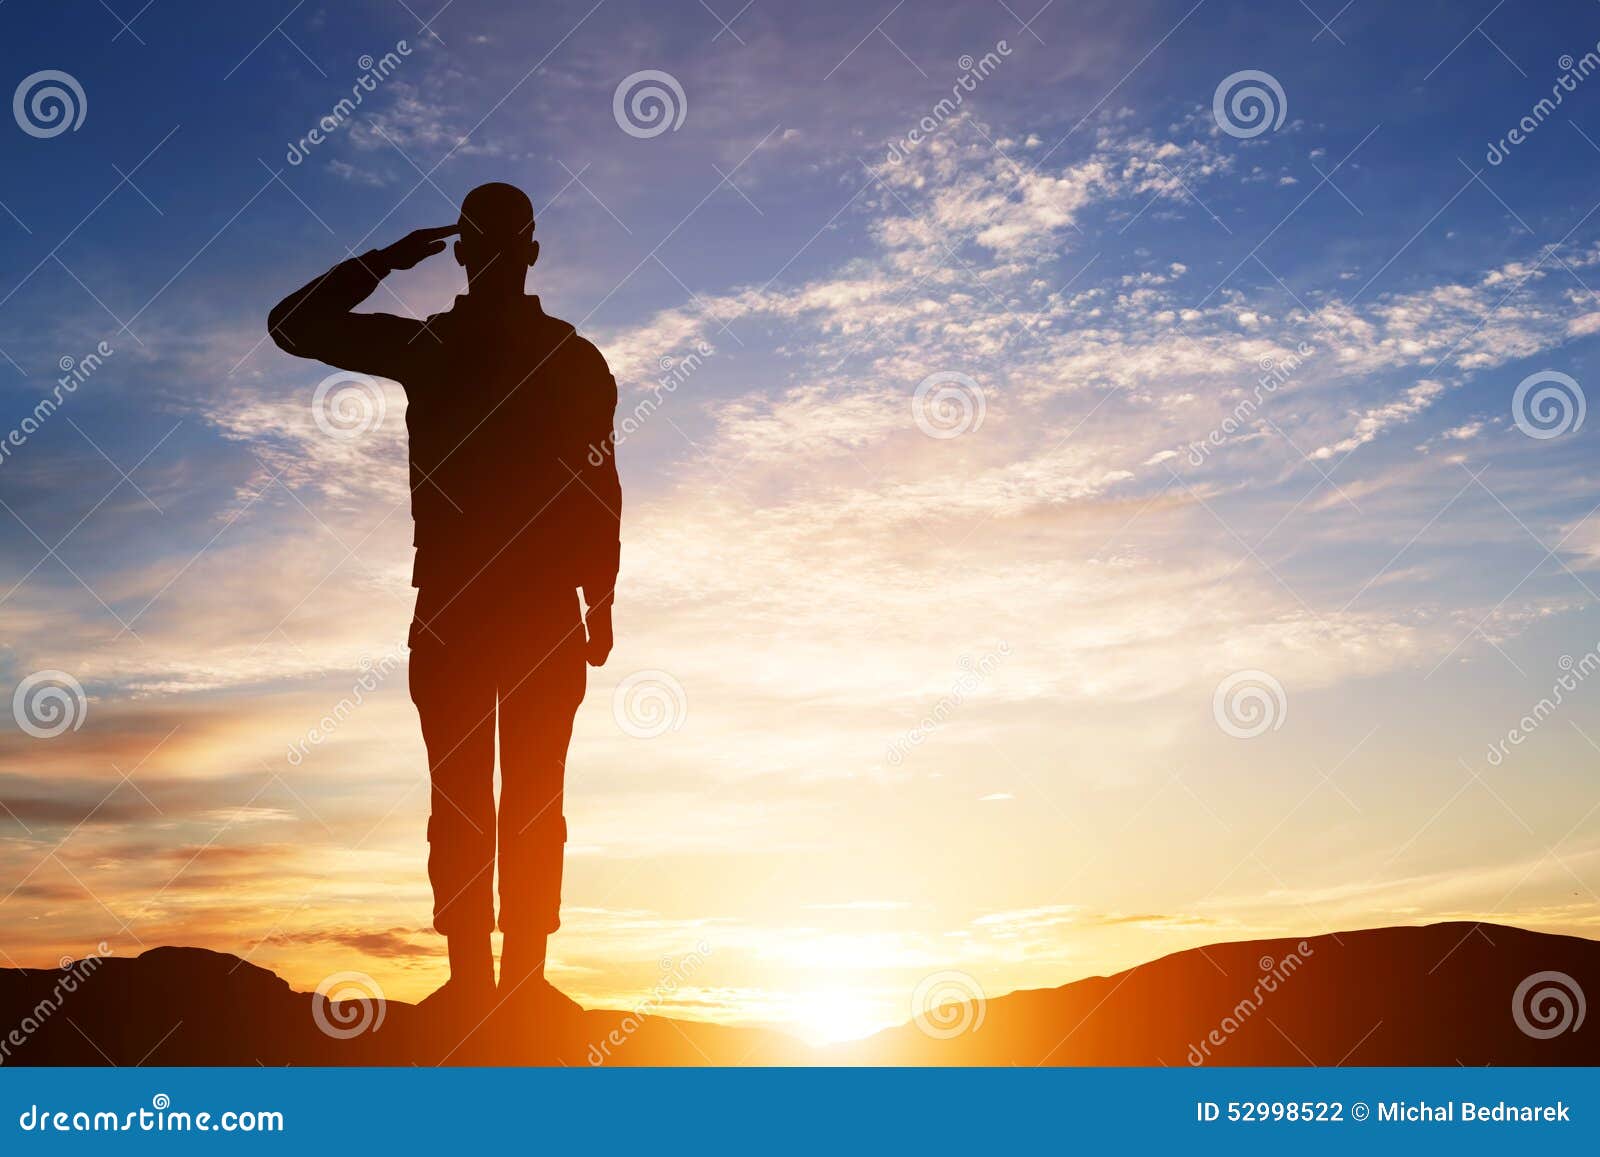 soldier salute. silhouette on sunset sky. army, military.